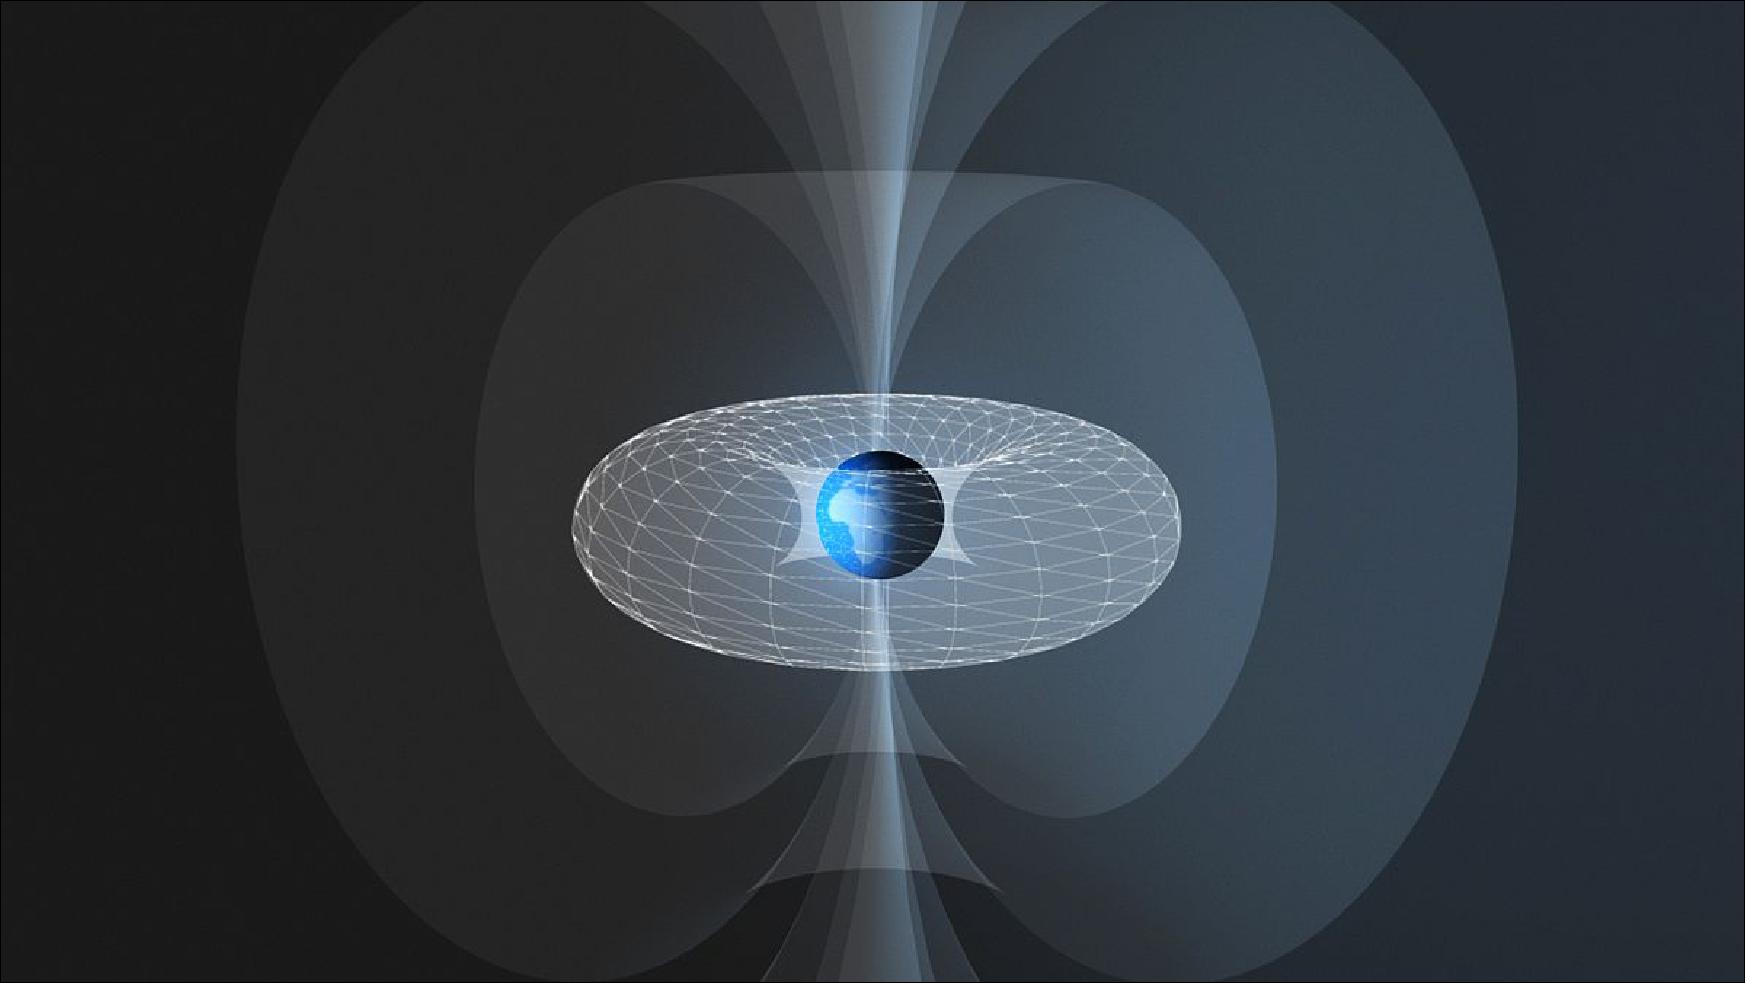 Figure 32: This illustration shows an artist's rendition of the plasmasphere, the innermost part of Earth's magnetosphere. This doughnut-shaped region is centered around the the planet's equator and rotates along with it (image credit: ESA/ATG medialab)